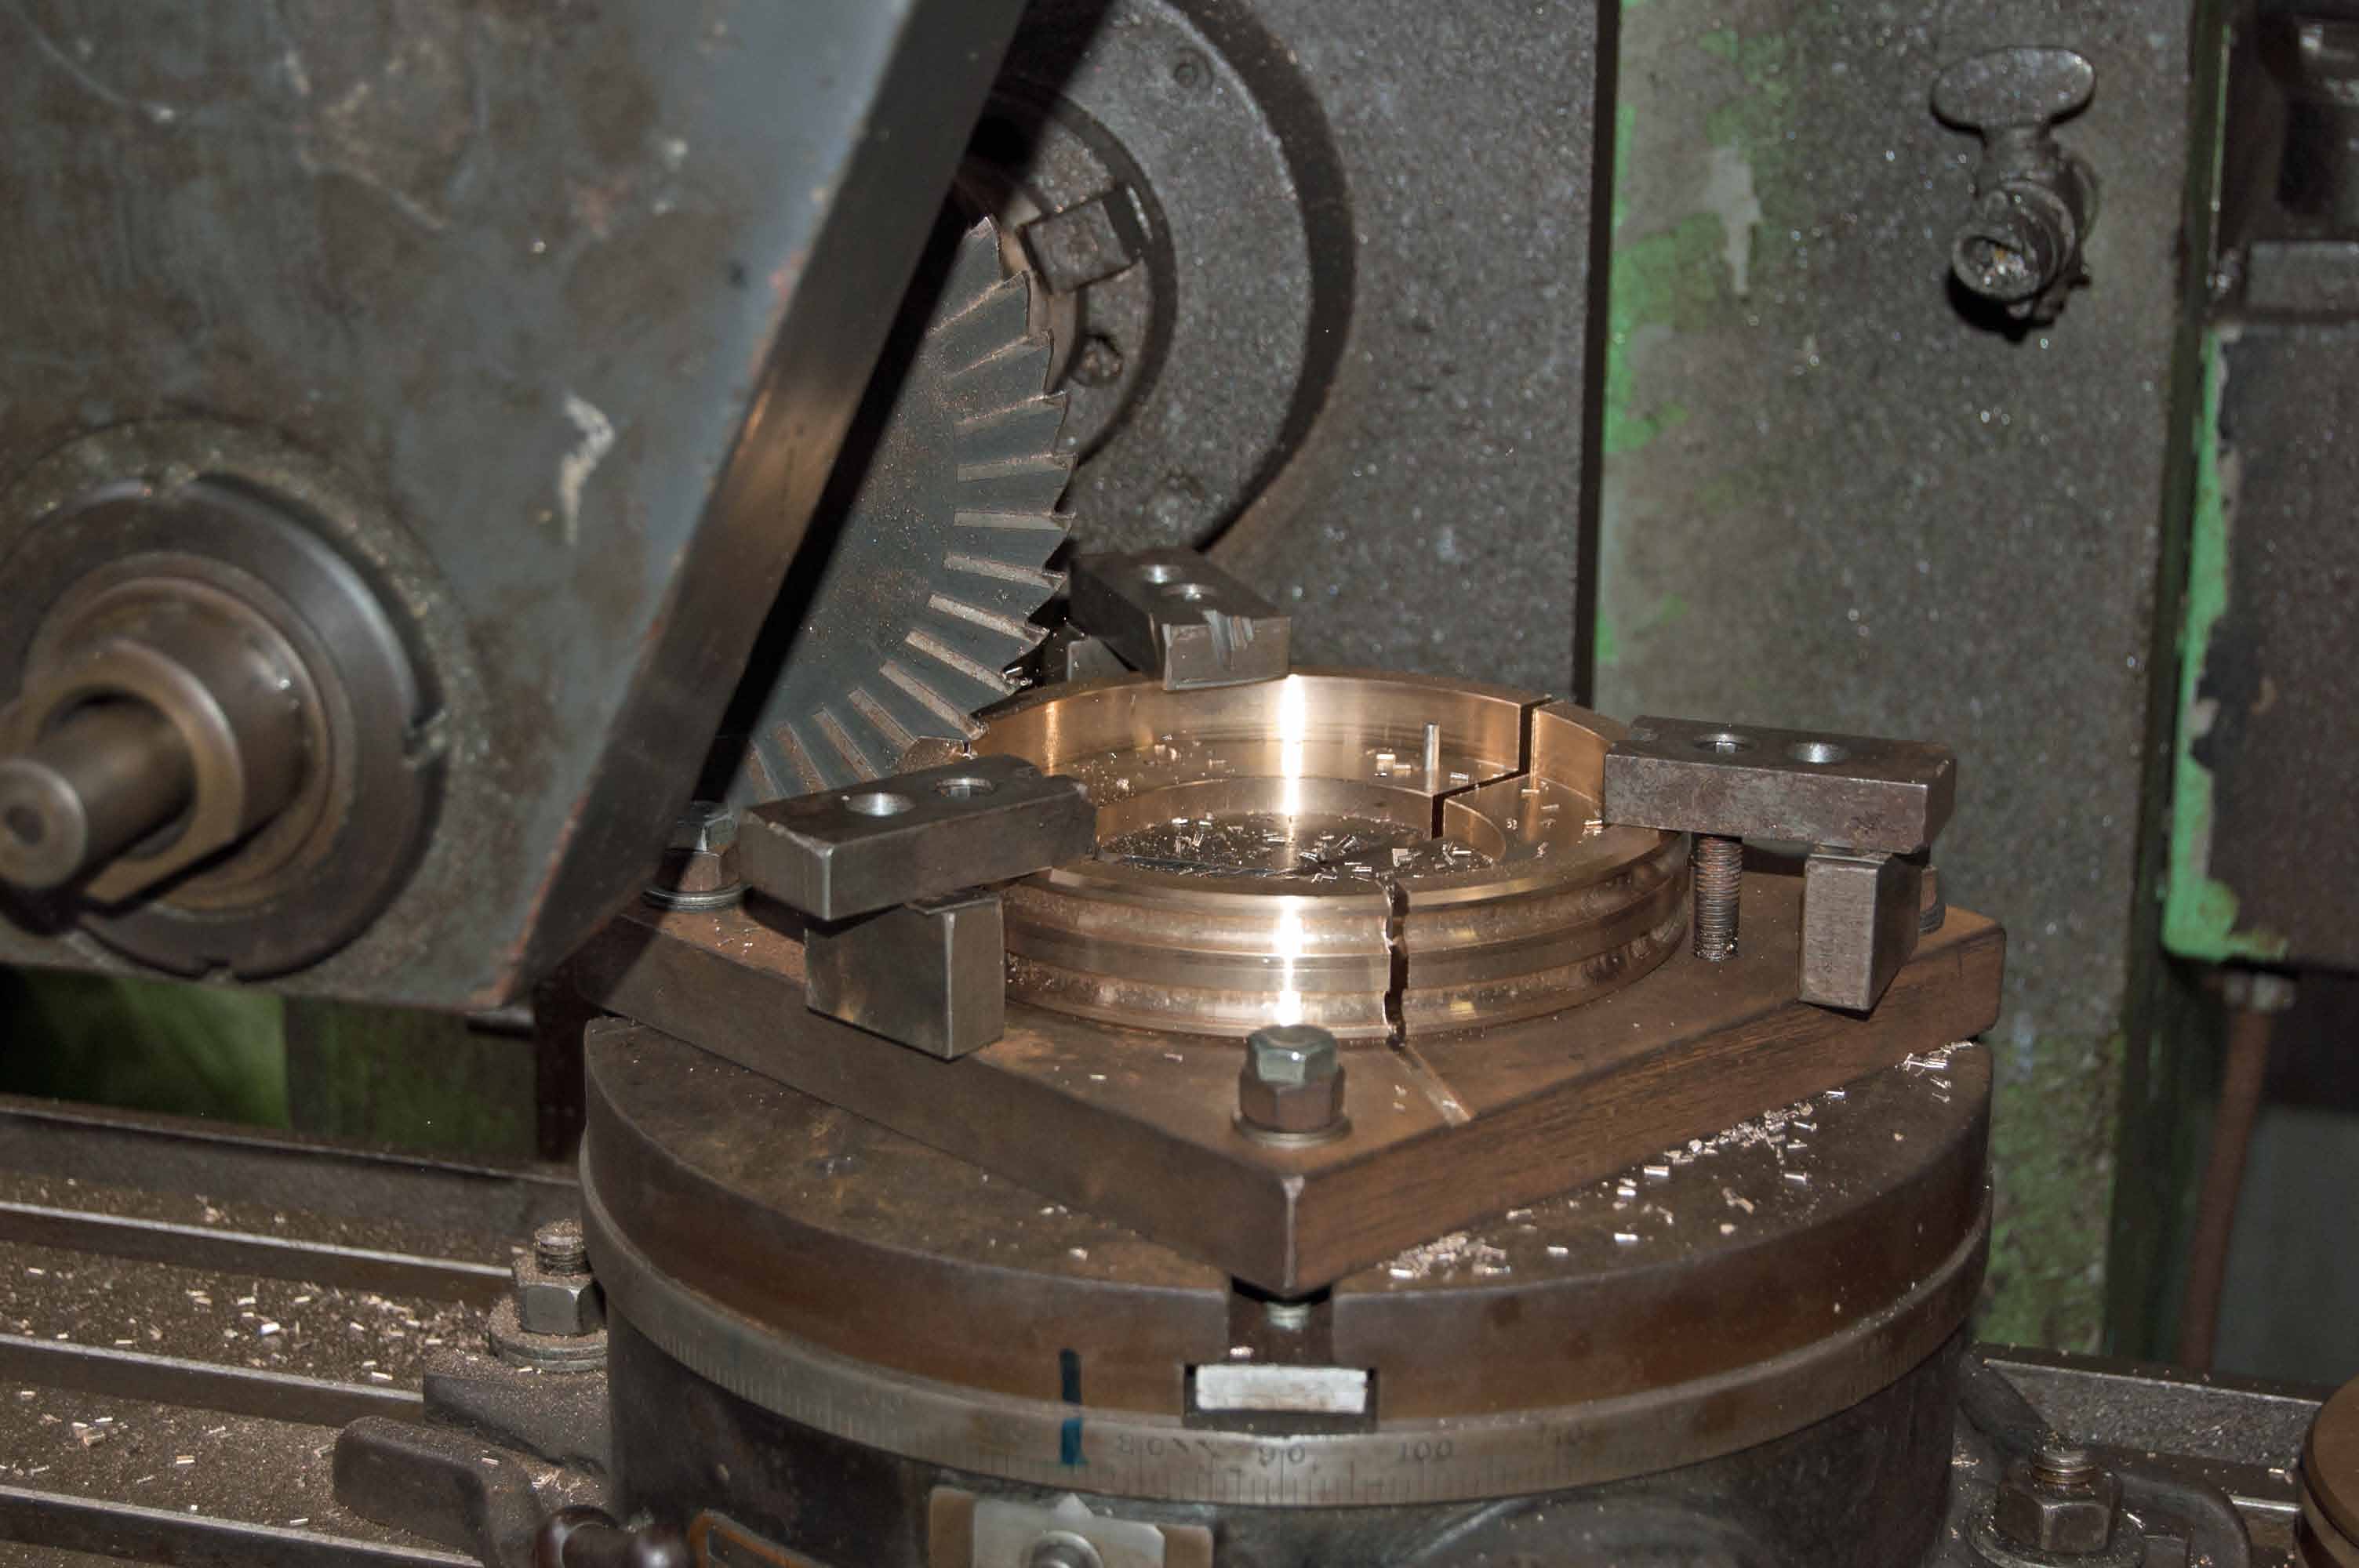 The outer part of the gland packing ring is cut into three pieces on the milling machine